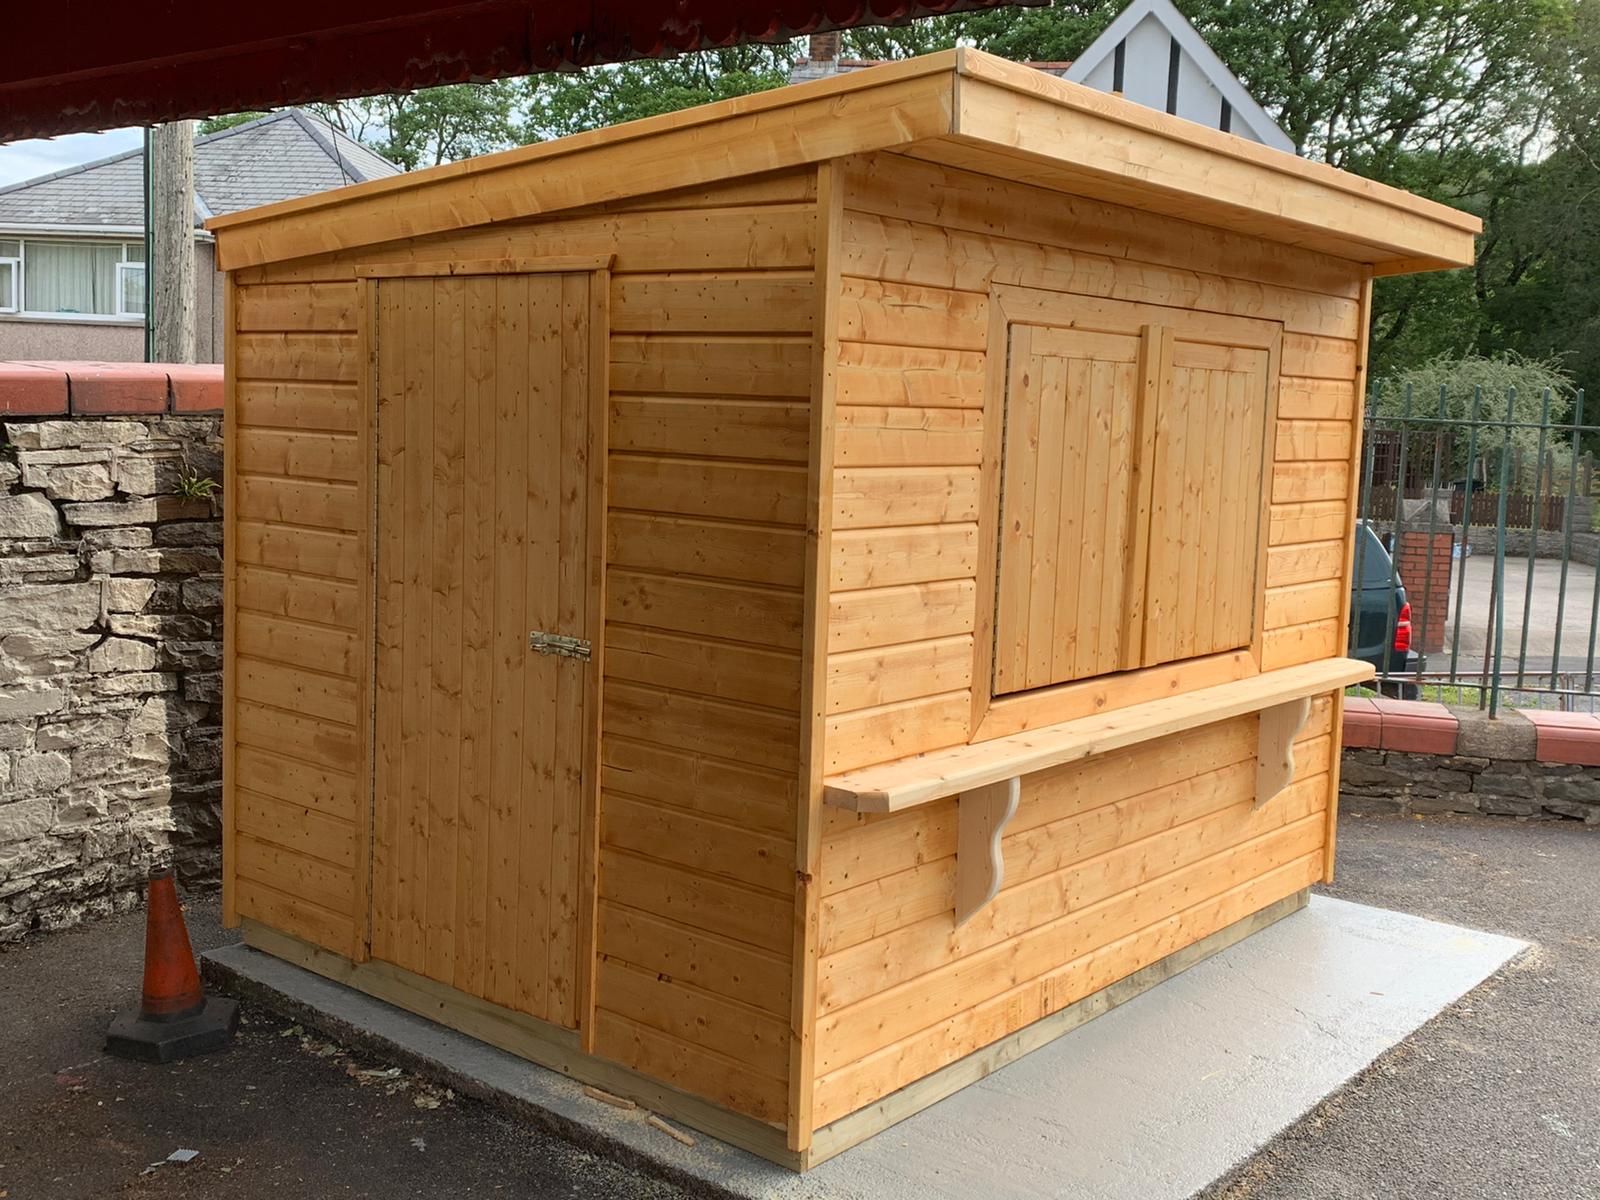 9' x 7' Market Chalet useable to sell items from to raise funds for the school.